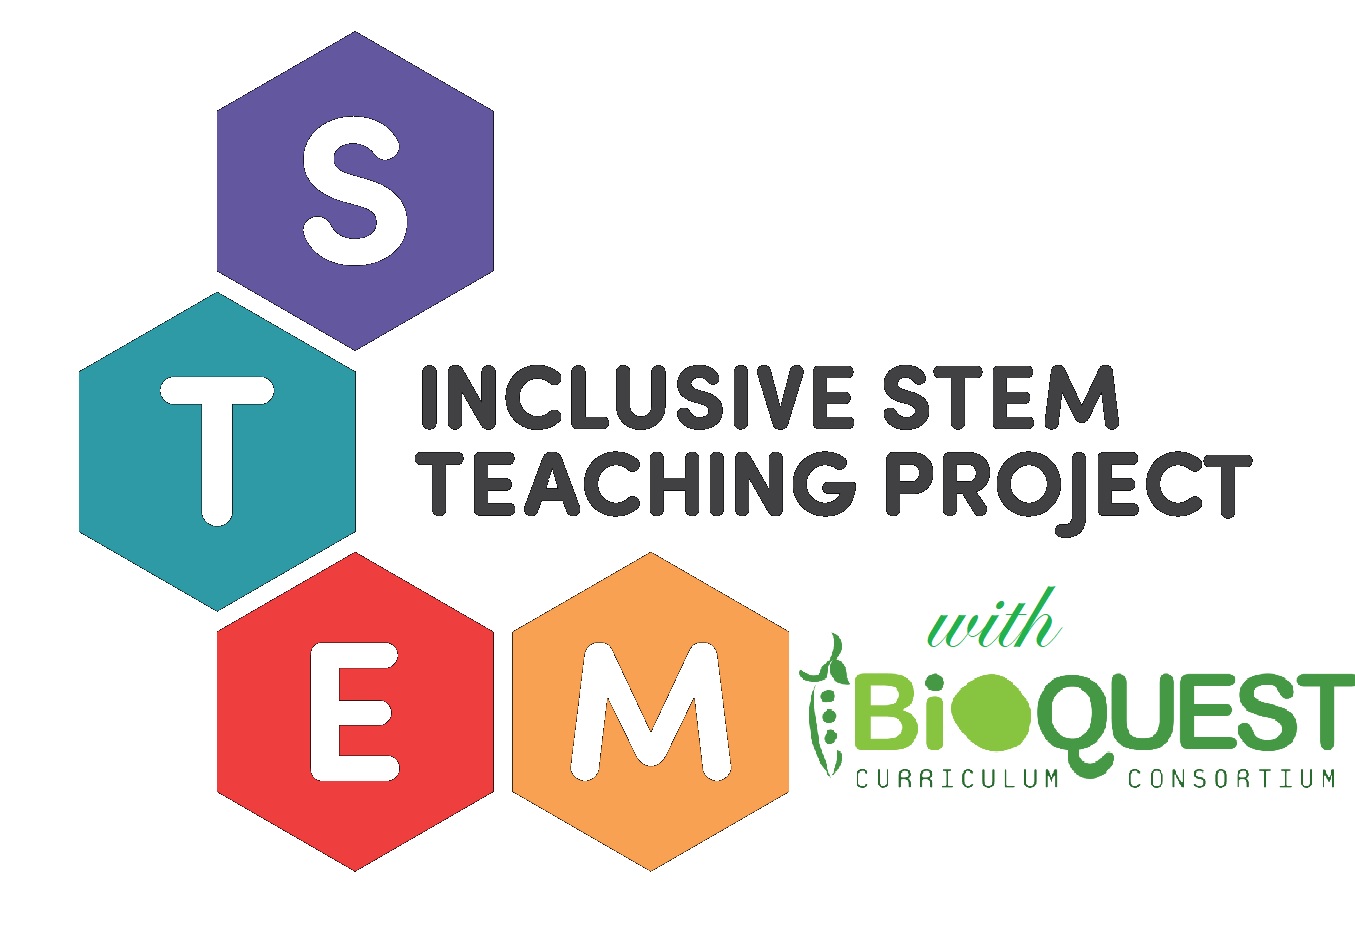 Experiencing the Inclusive STEM Teaching Project through BioQUEST Learning Communities